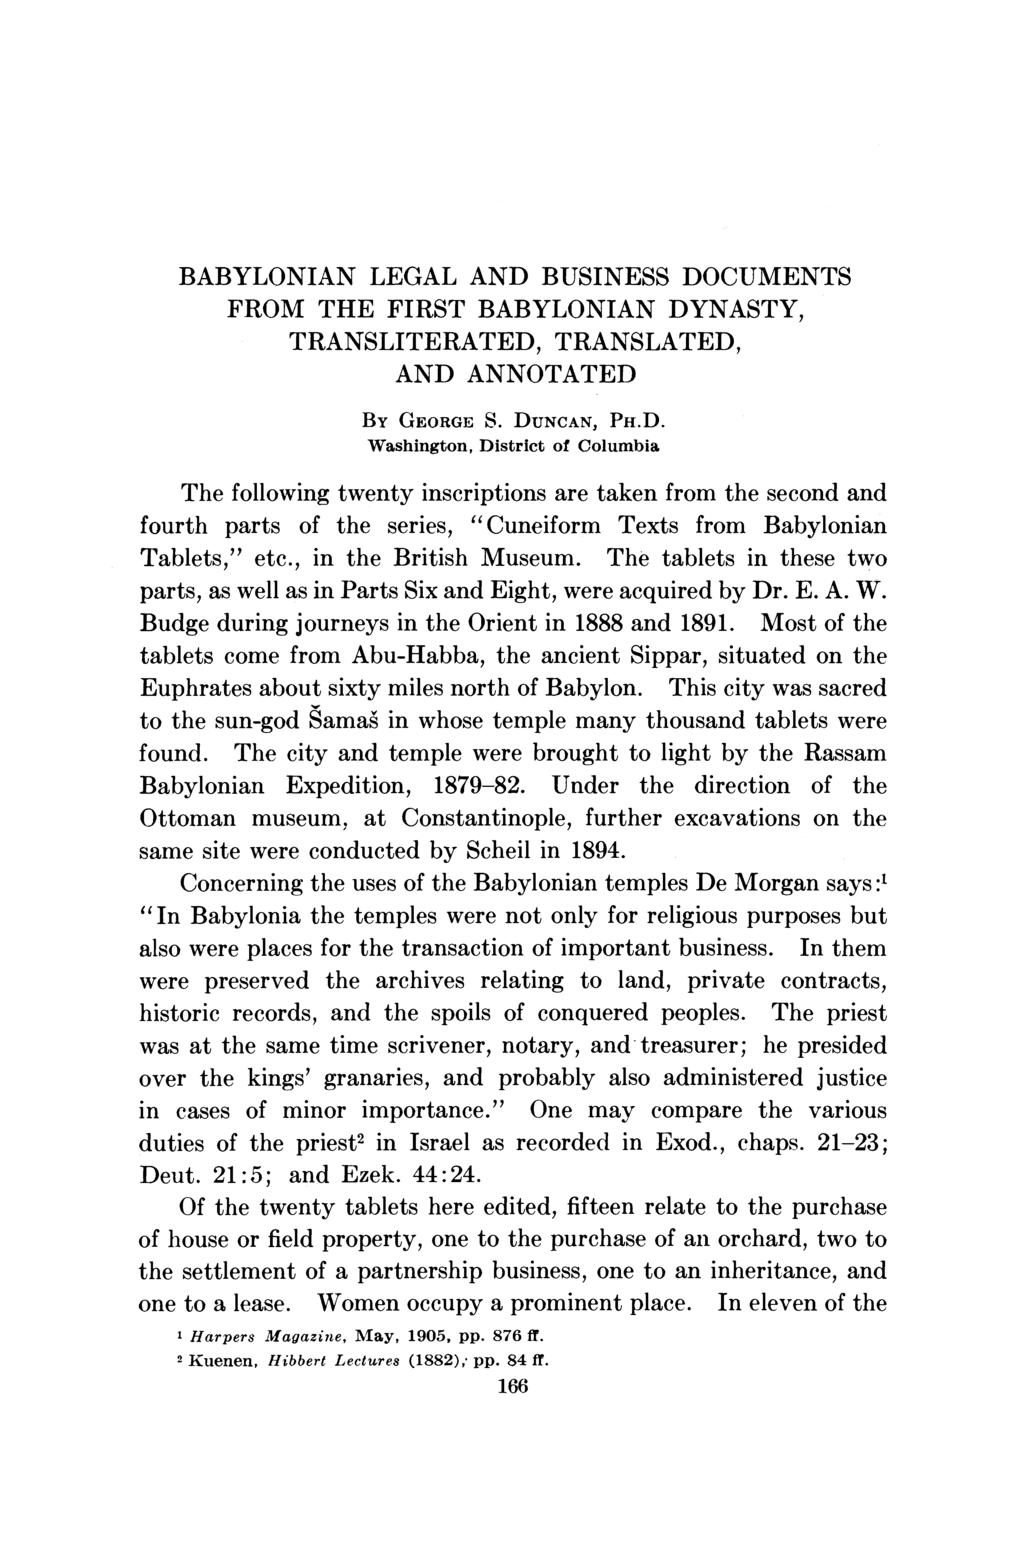 BABYLONIAN LEGAL AND BUSINESS DOCUMENTS FROM THE FIRST BABYLONIAN DYNASTY, TRANSLITERATED, TRANSLATED, AND ANNOTATED BY GEORGE S. DUNCAN, PH.D. Washington, District of Columbia The following twenty inscriptions are taken from the second and fourth parts of the series, "Cuneiform Texts from Babylonian Tablets," etc.